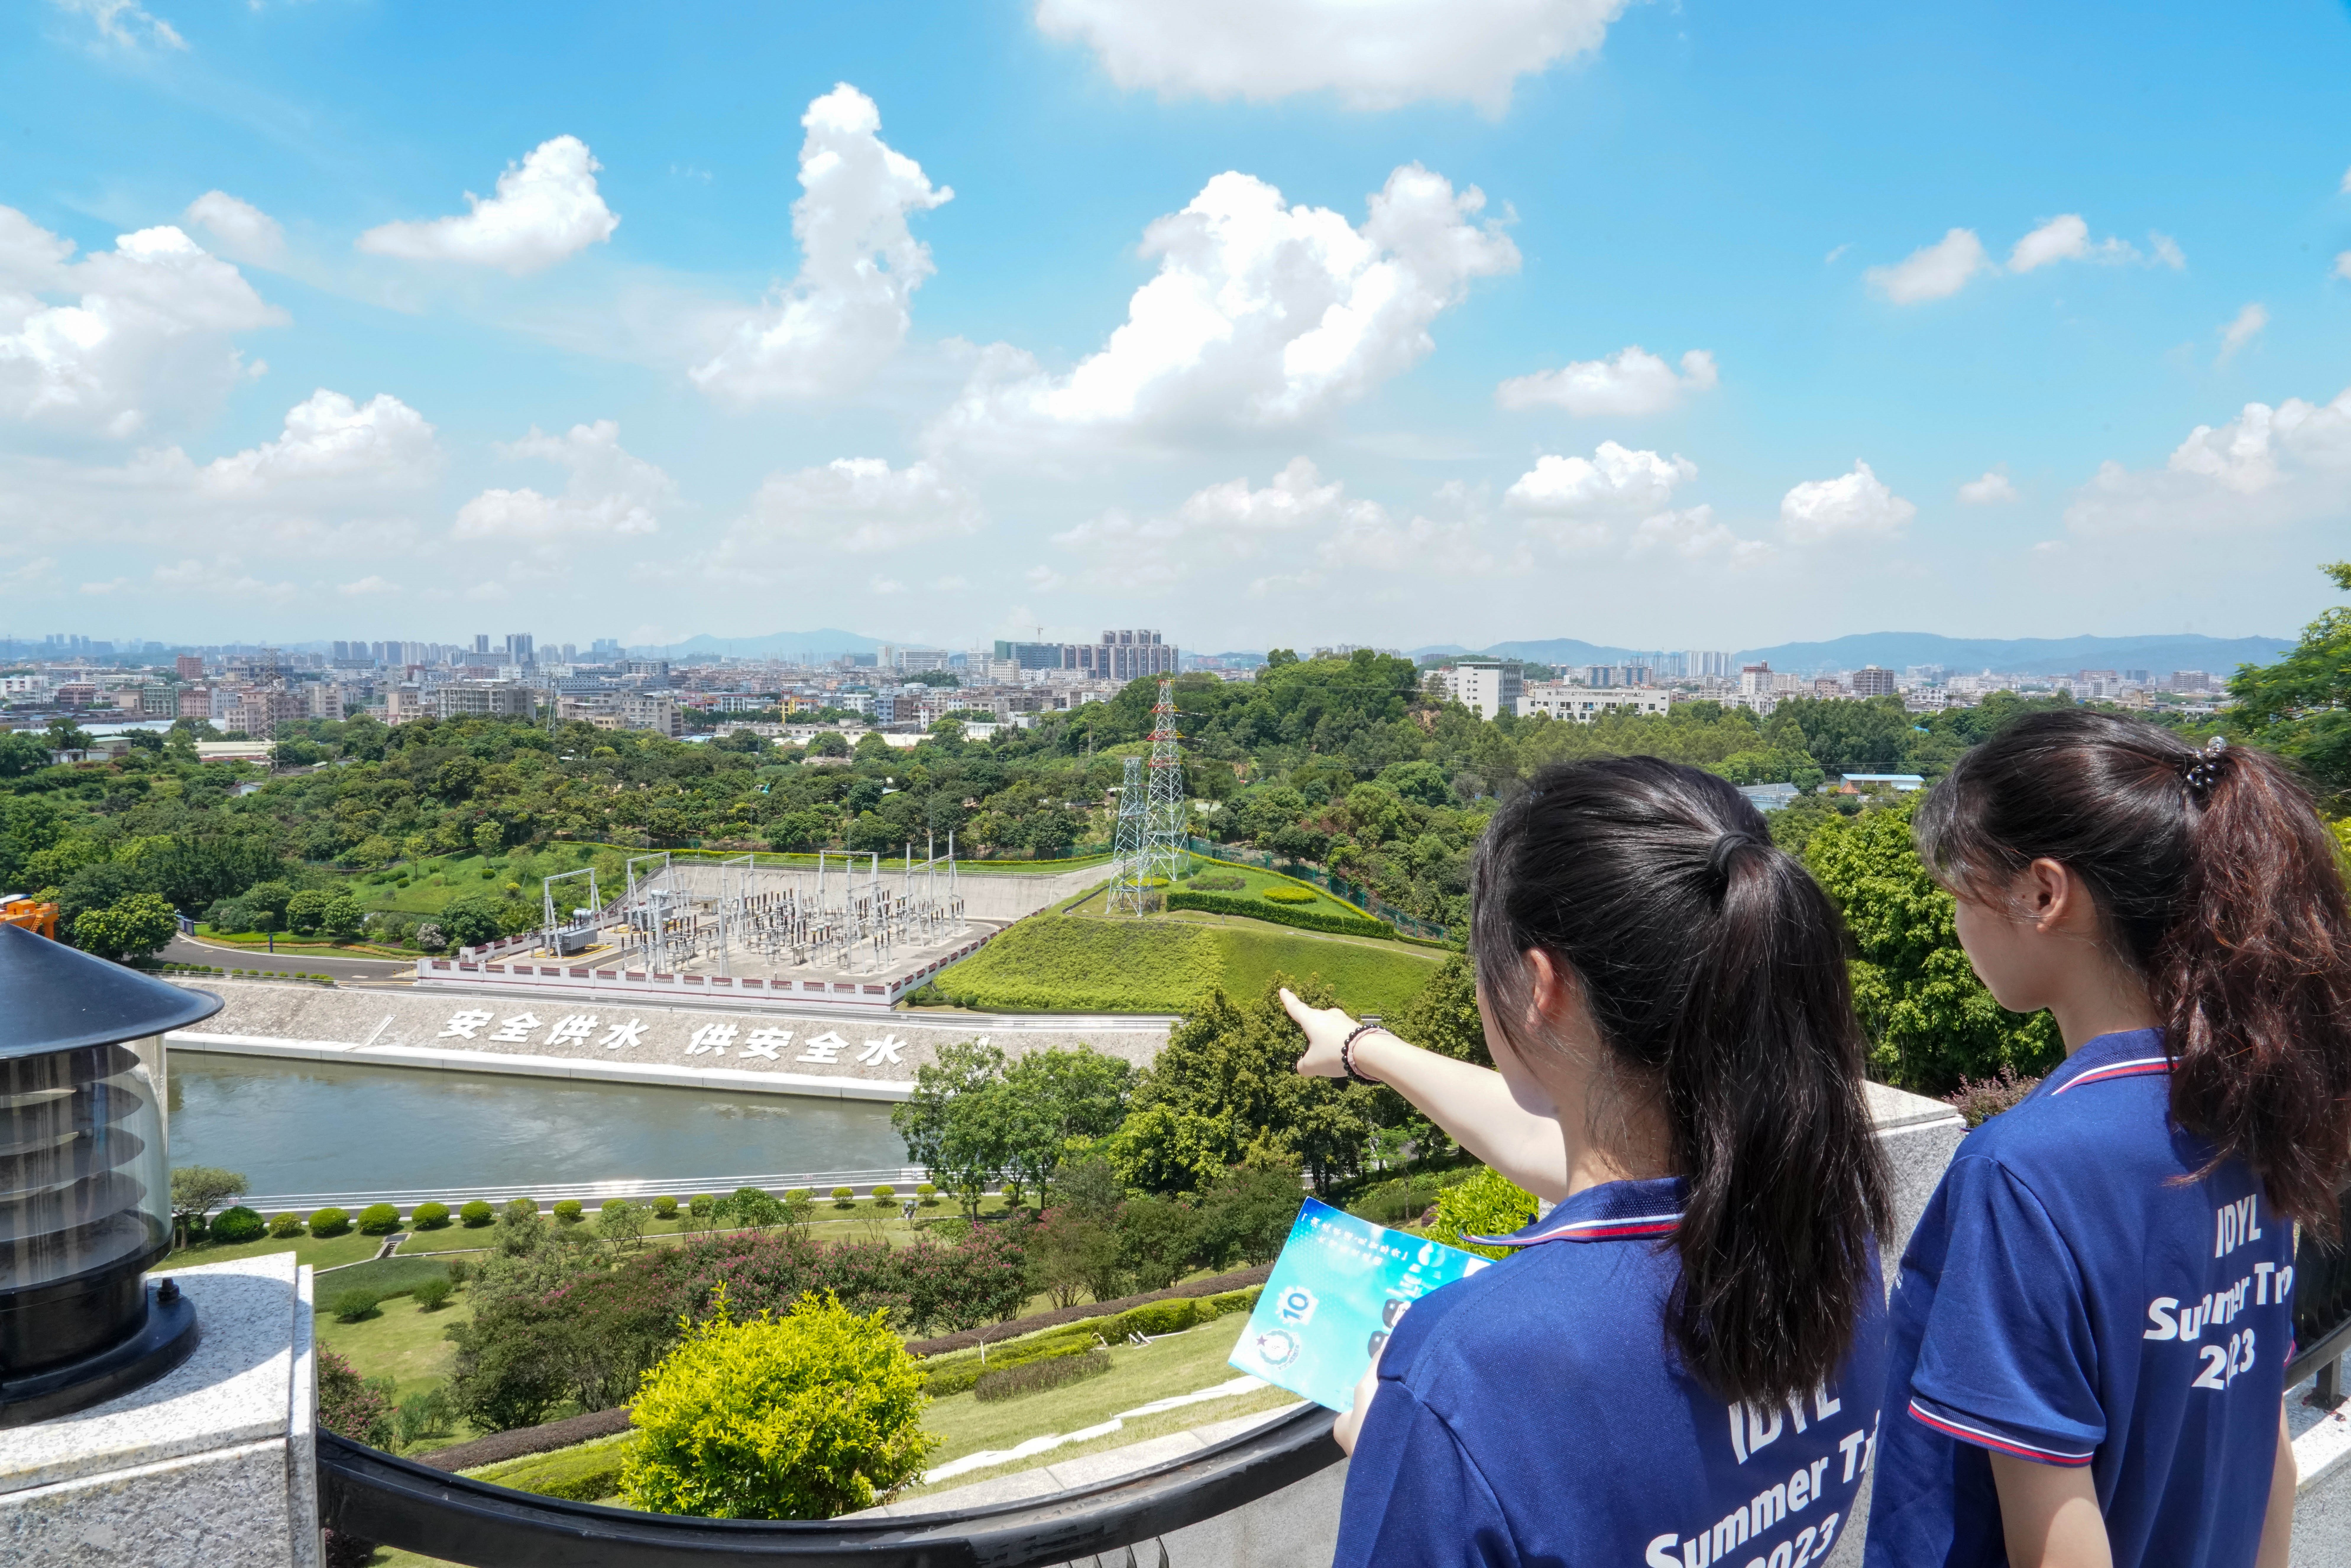 Members of the Immigration Department Youth Leaders Corps visited the Dongjiang-Shenzhen Water Supply Project Memorial Park in Dongguan on July 25 to understand the history of the Dongjiang water supply to Hong Kong and the challenges encountered during its construction.